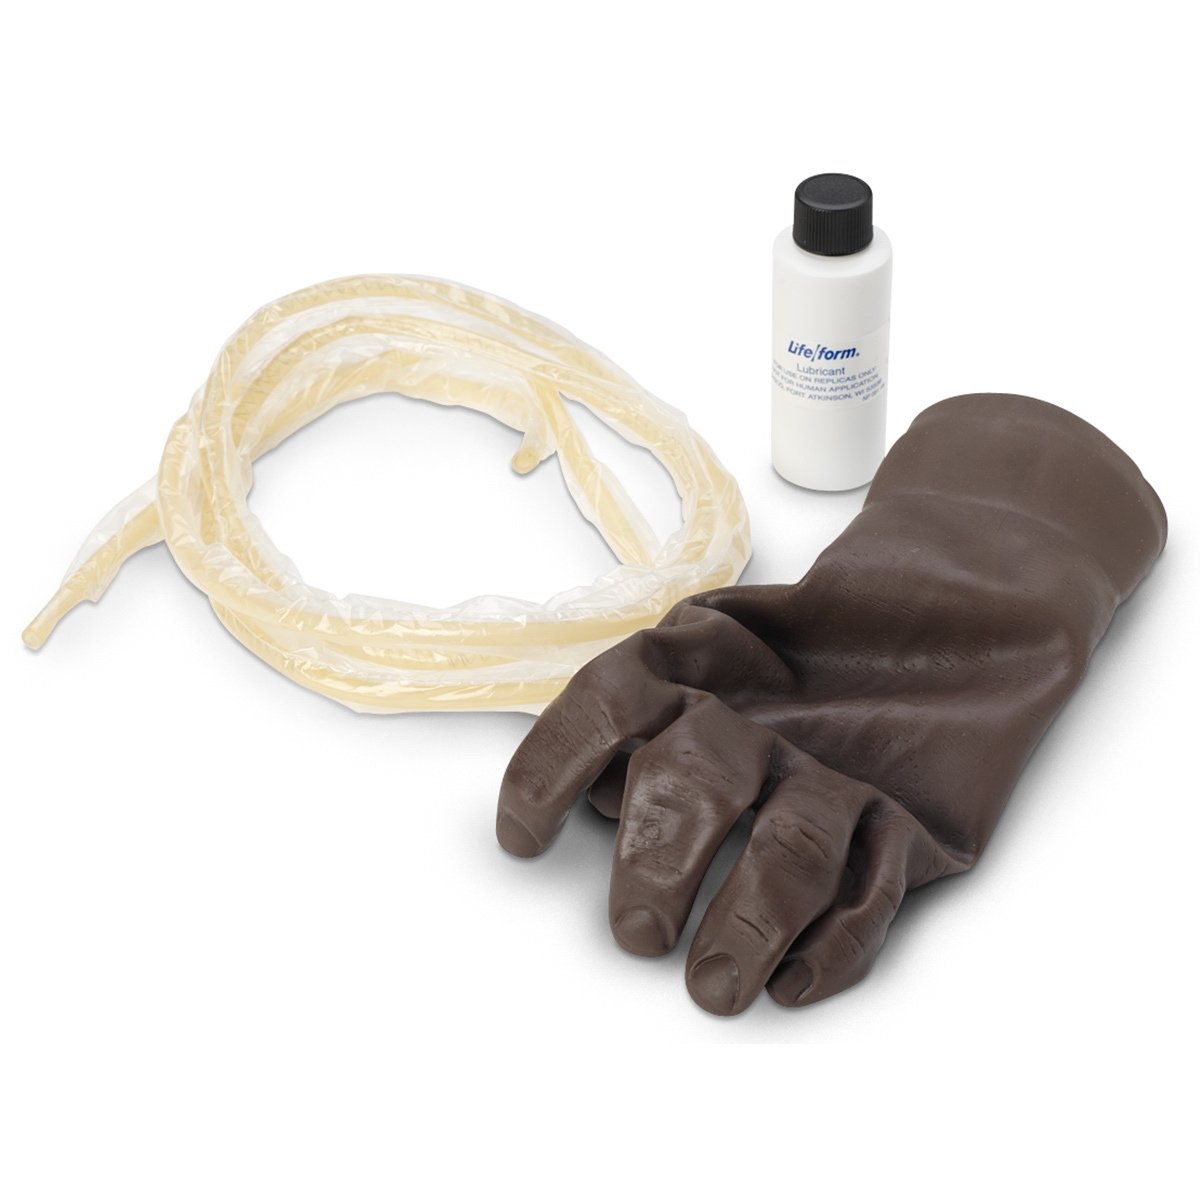 Life/form Advanced IV Hand Replacement Skin and Veins - Dark